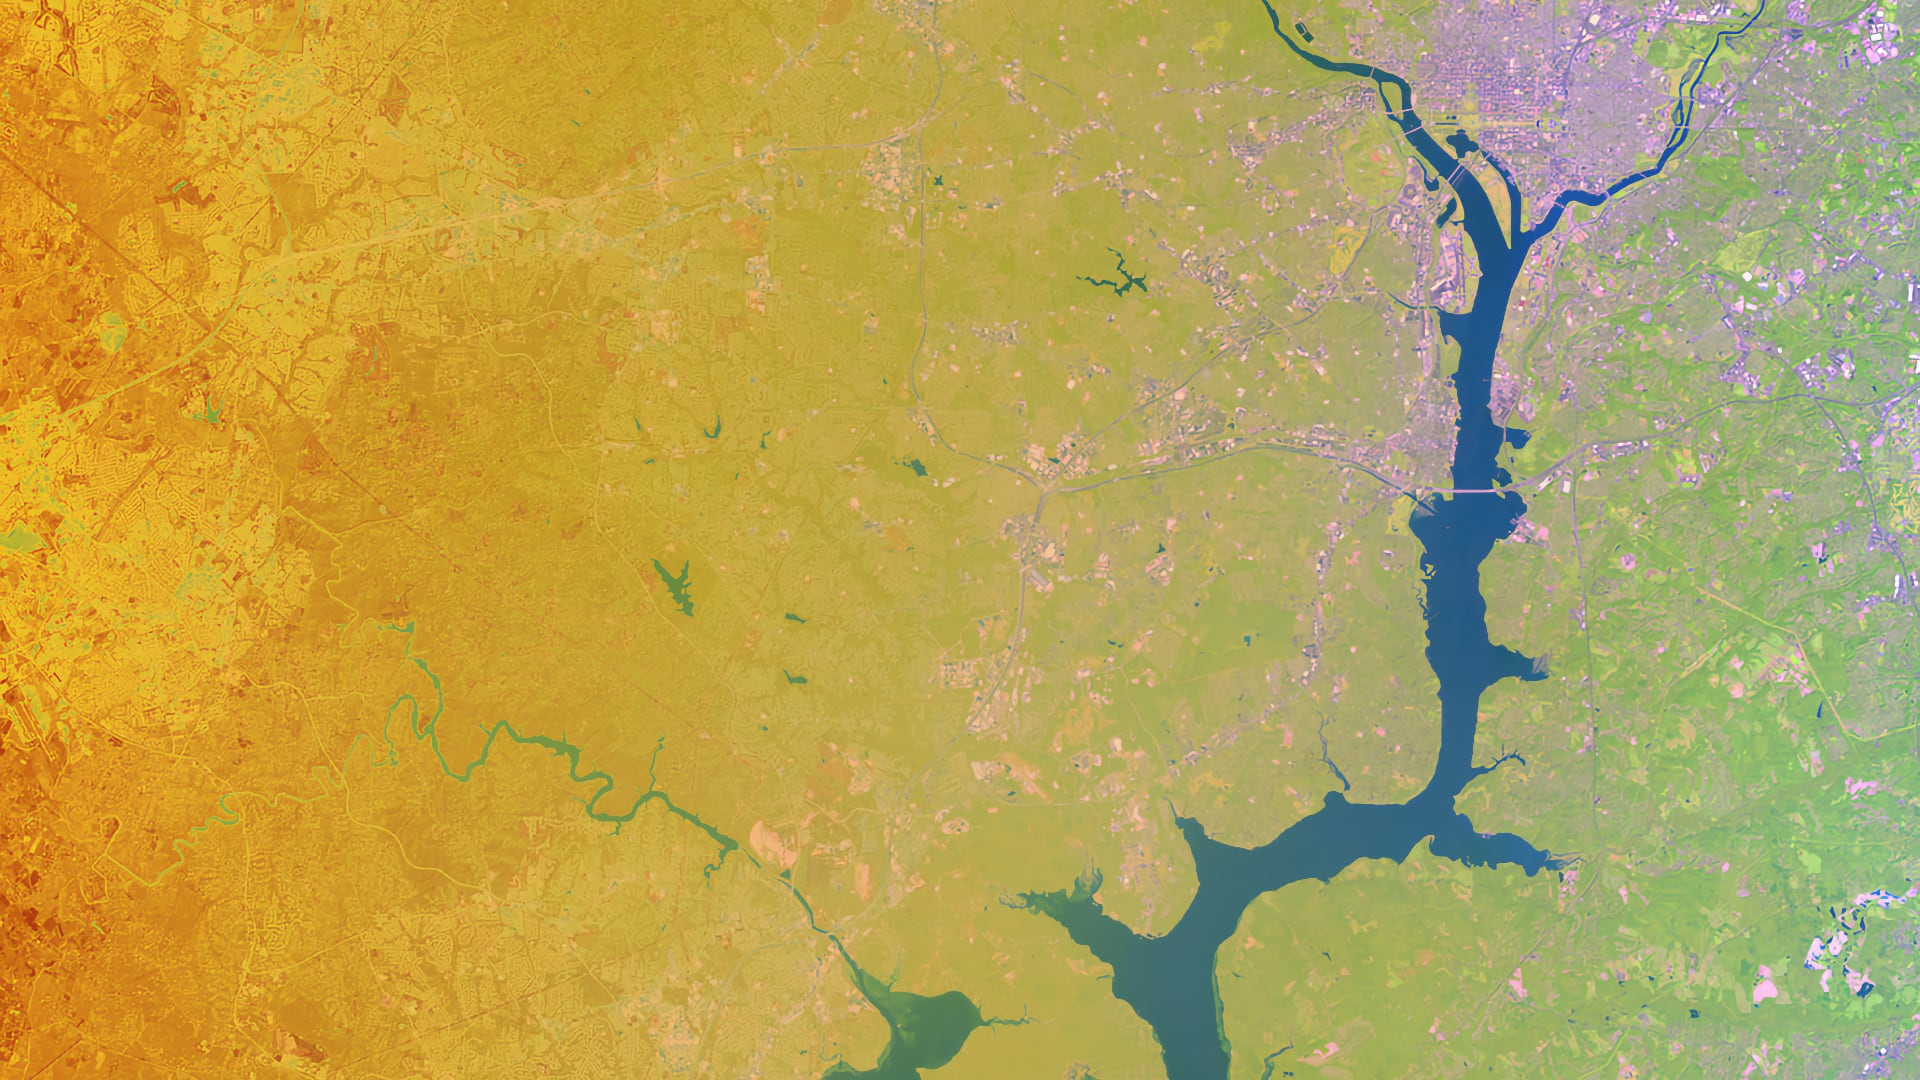 NDVI-processed imagery using Lansdat 8 data (2020), blended with a true color band combination (4,5,6). Fairfax County located in east Virginia is displayed. The NDVI highlights vegetation and impervious surfaces which were utilized for flood susceptibility modeling.  Keywords: NDVI, Urban Tree Canopy, Impervious Surface, Susceptibility